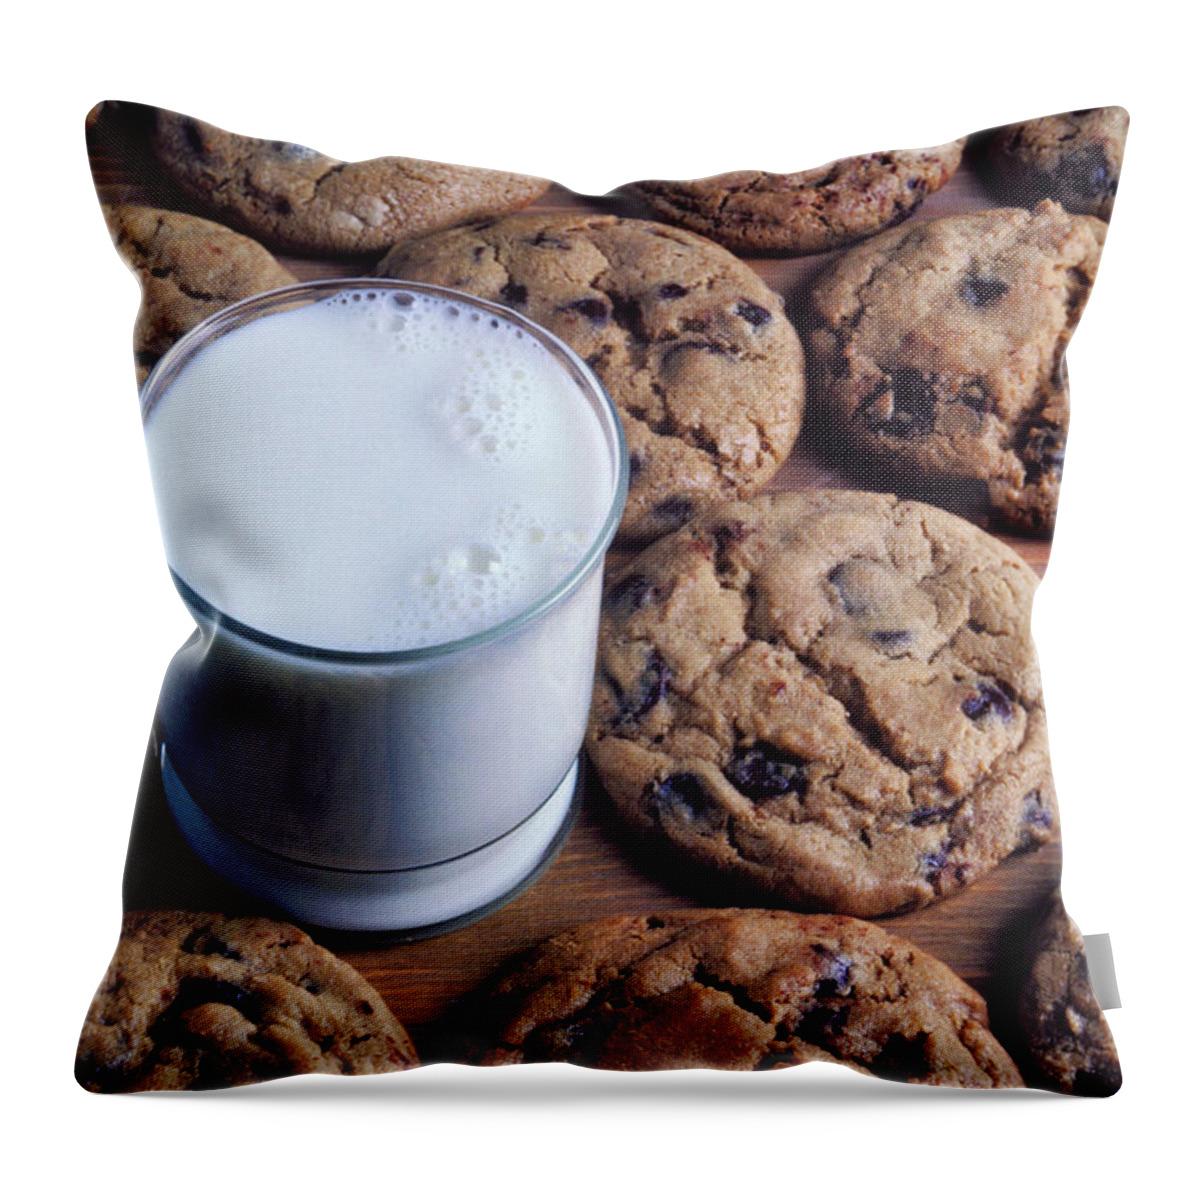 Chocolate Chip Throw Pillow featuring the photograph Chocolate chip cookies and glass of milk by Garry Gay